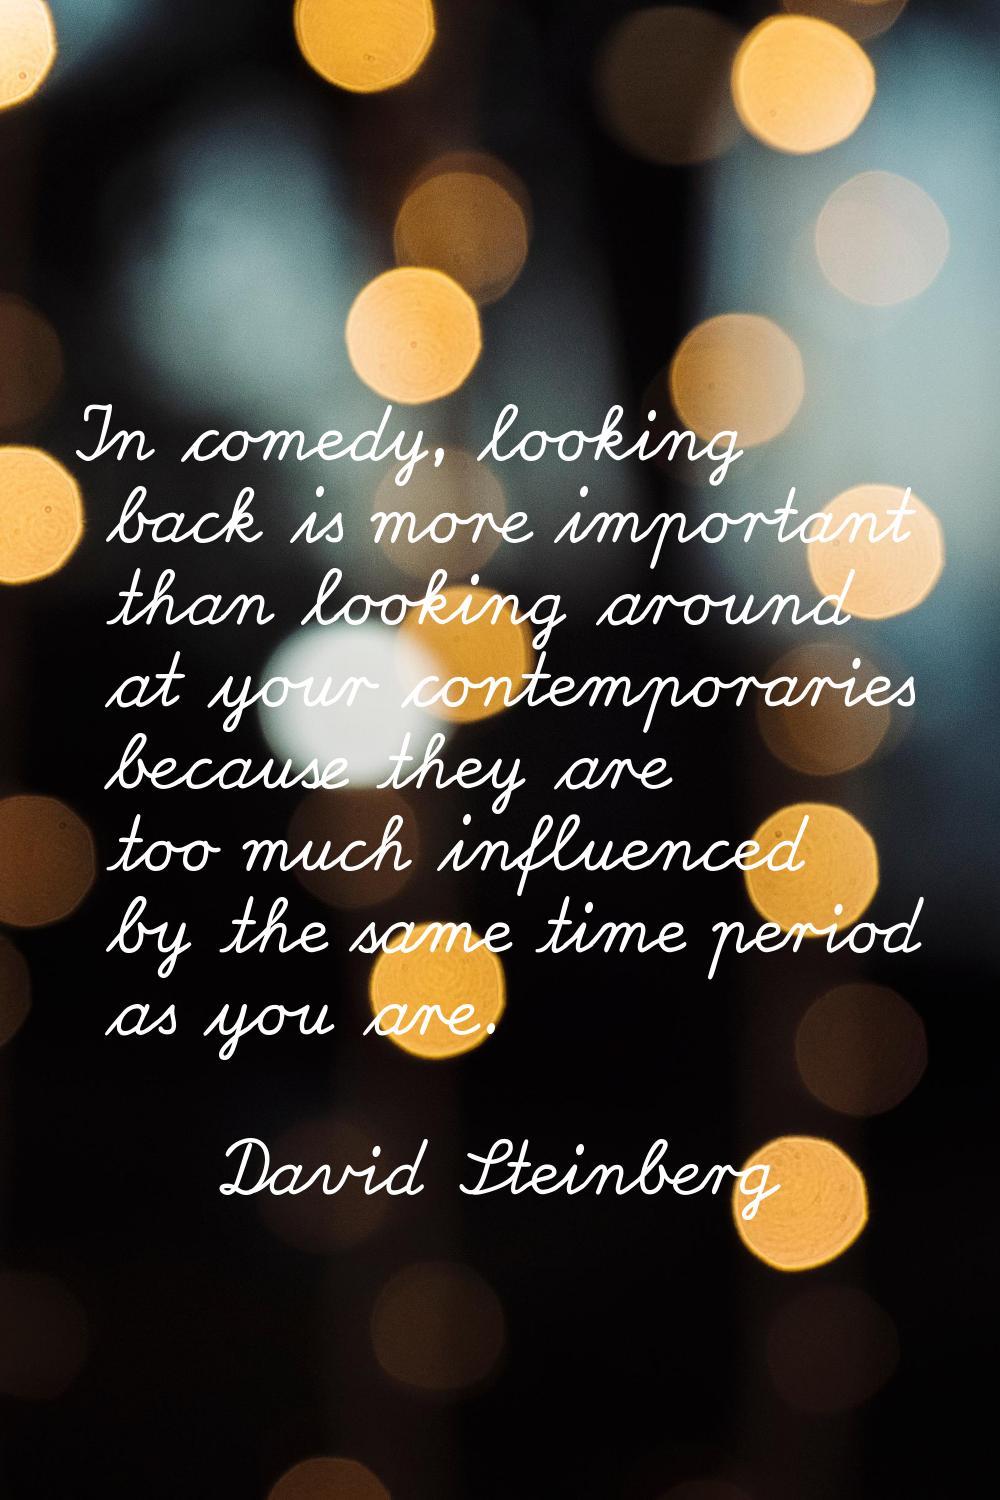 In comedy, looking back is more important than looking around at your contemporaries because they a